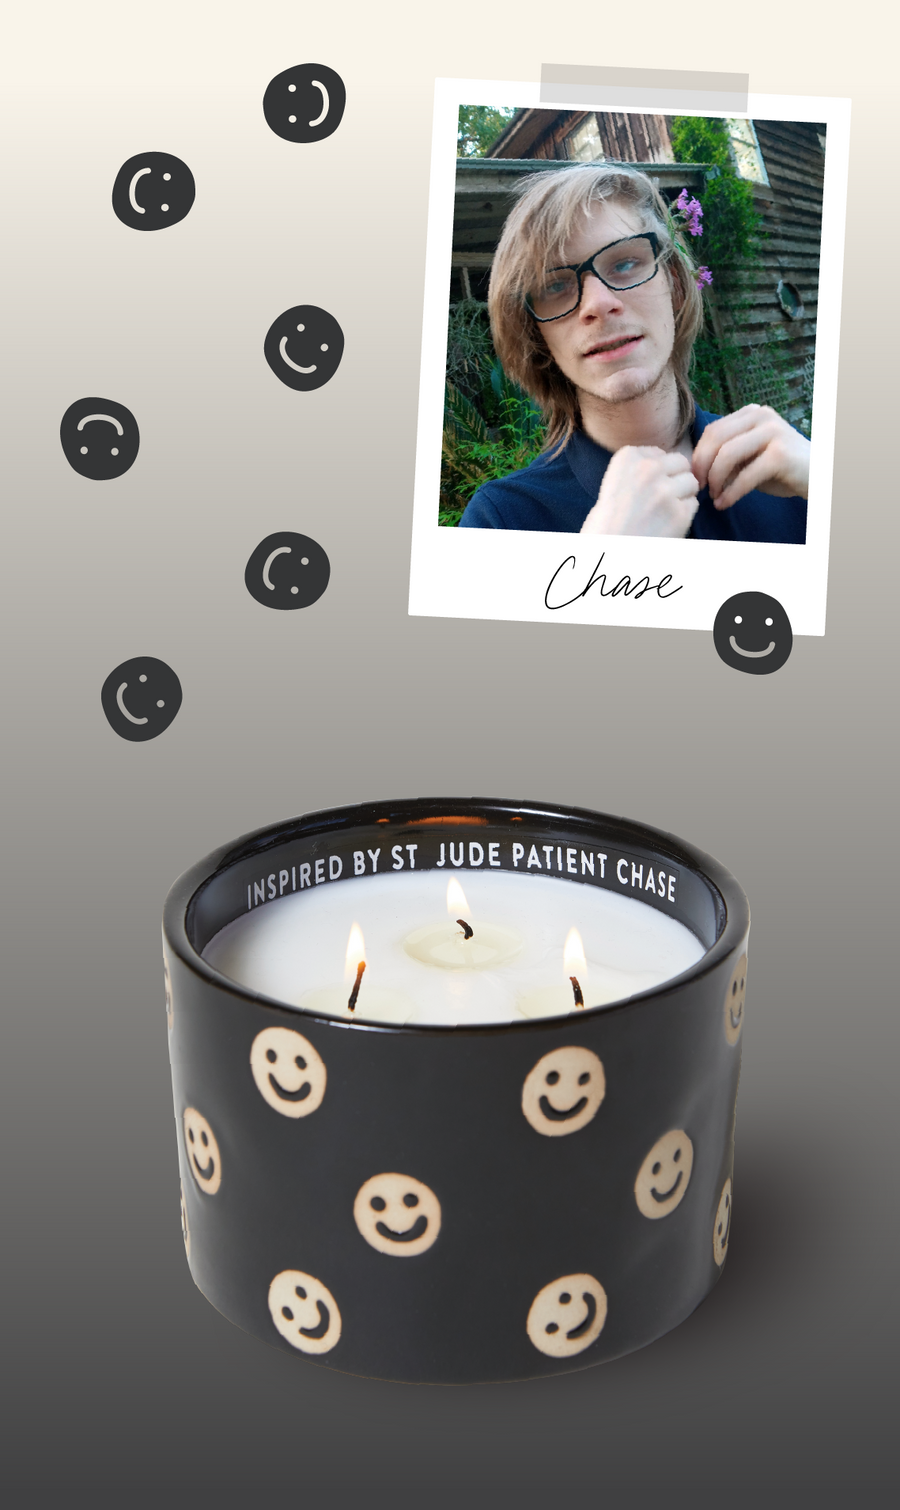 St. Jude patient, Chase with Paddywax Giveback Candle in black ceramic candle jar with smiley faces handpoured with soy wax